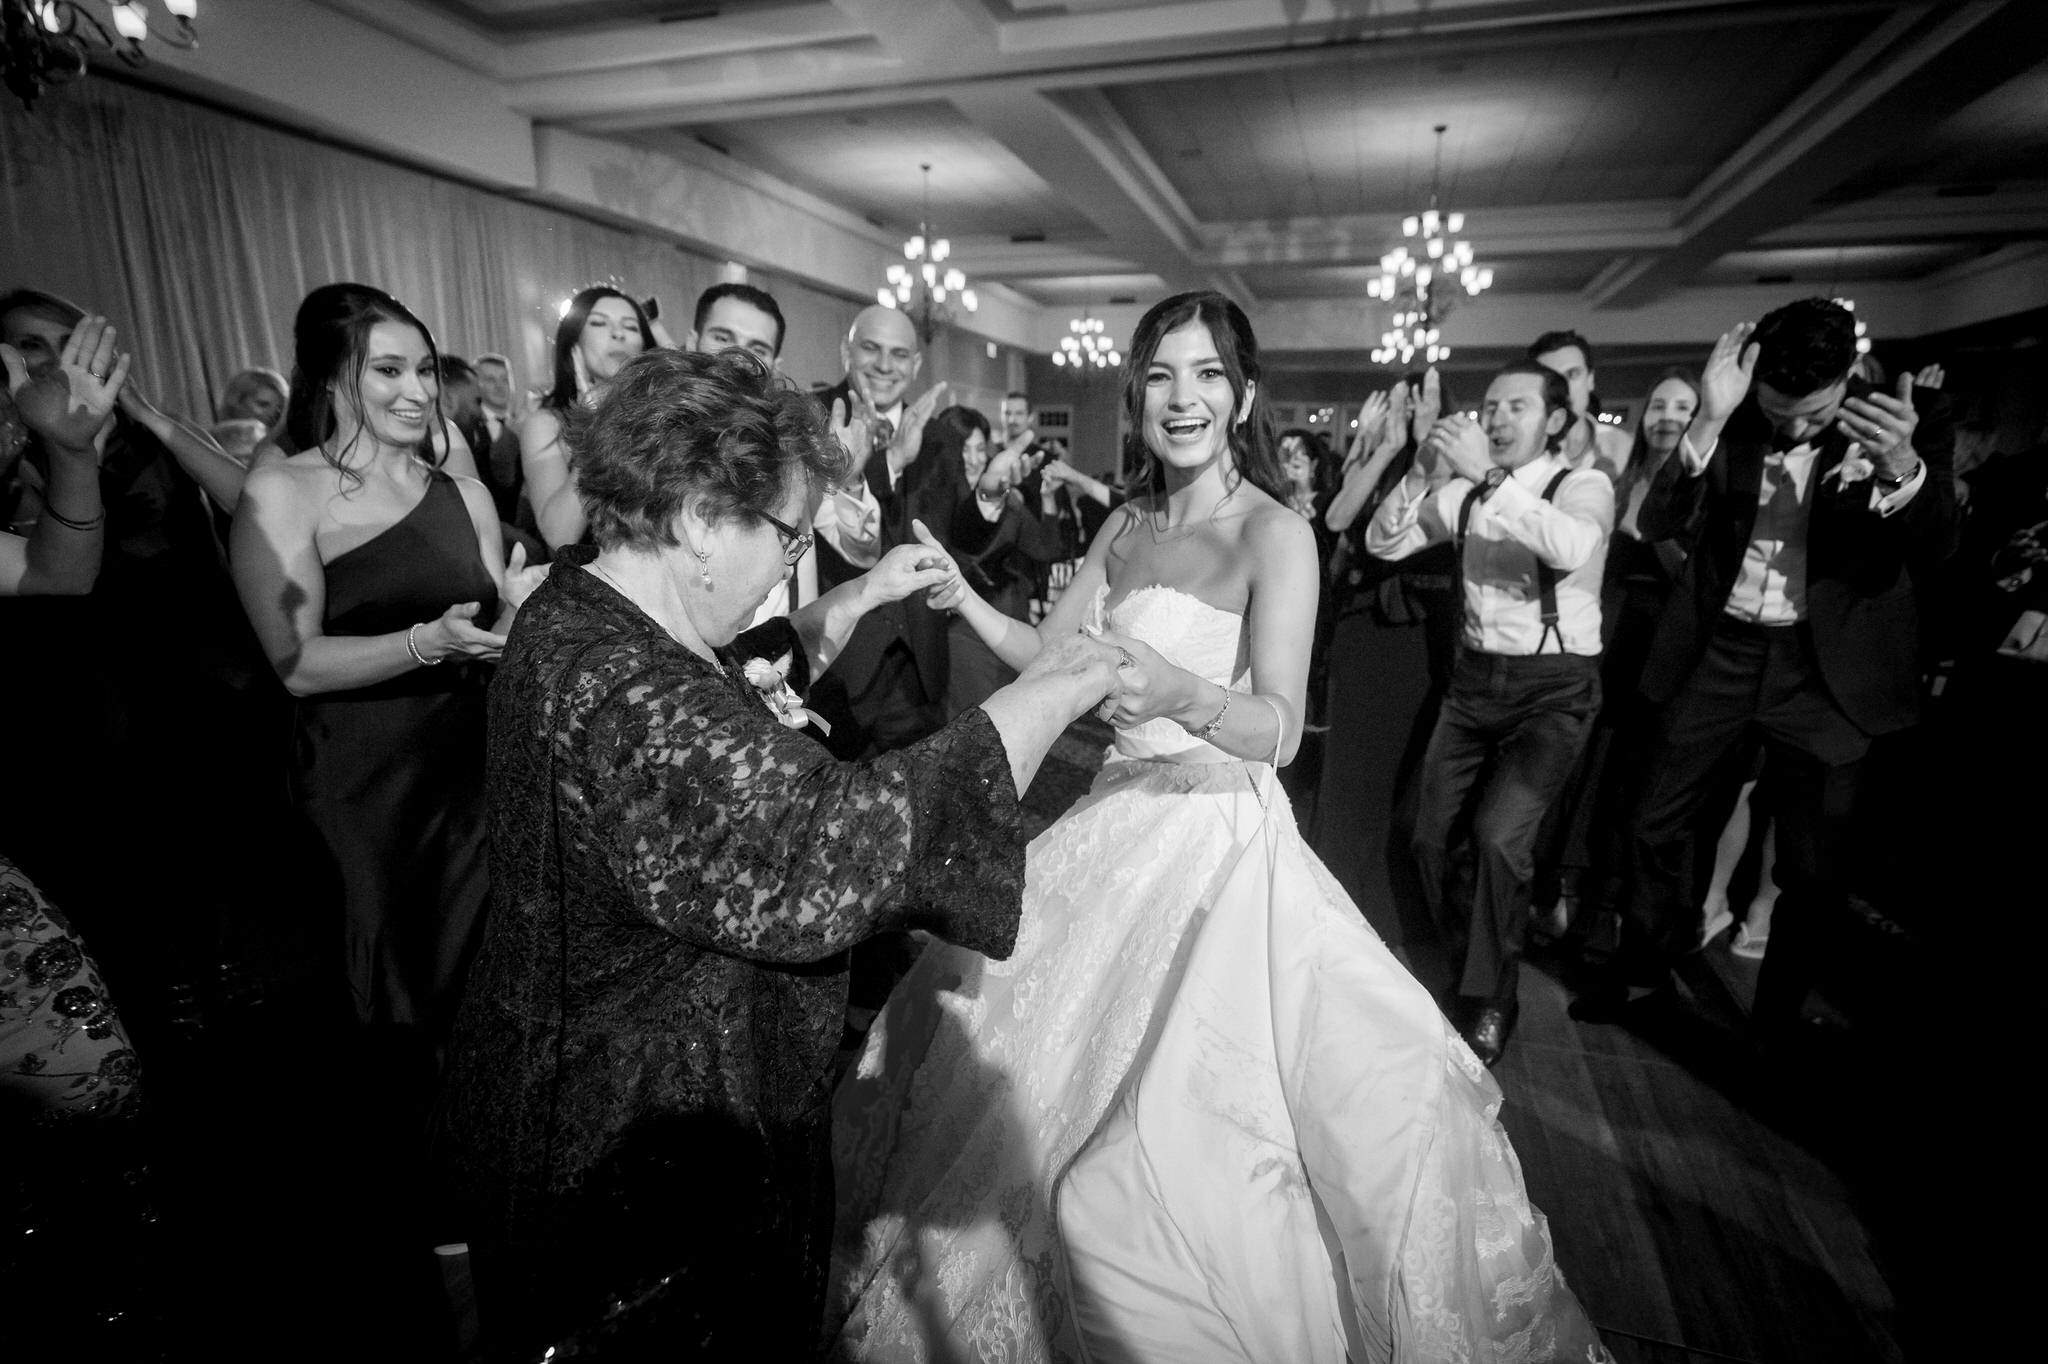 A bride dances with her grandma while surrounded by family at her wedding at Bay Harbor.  